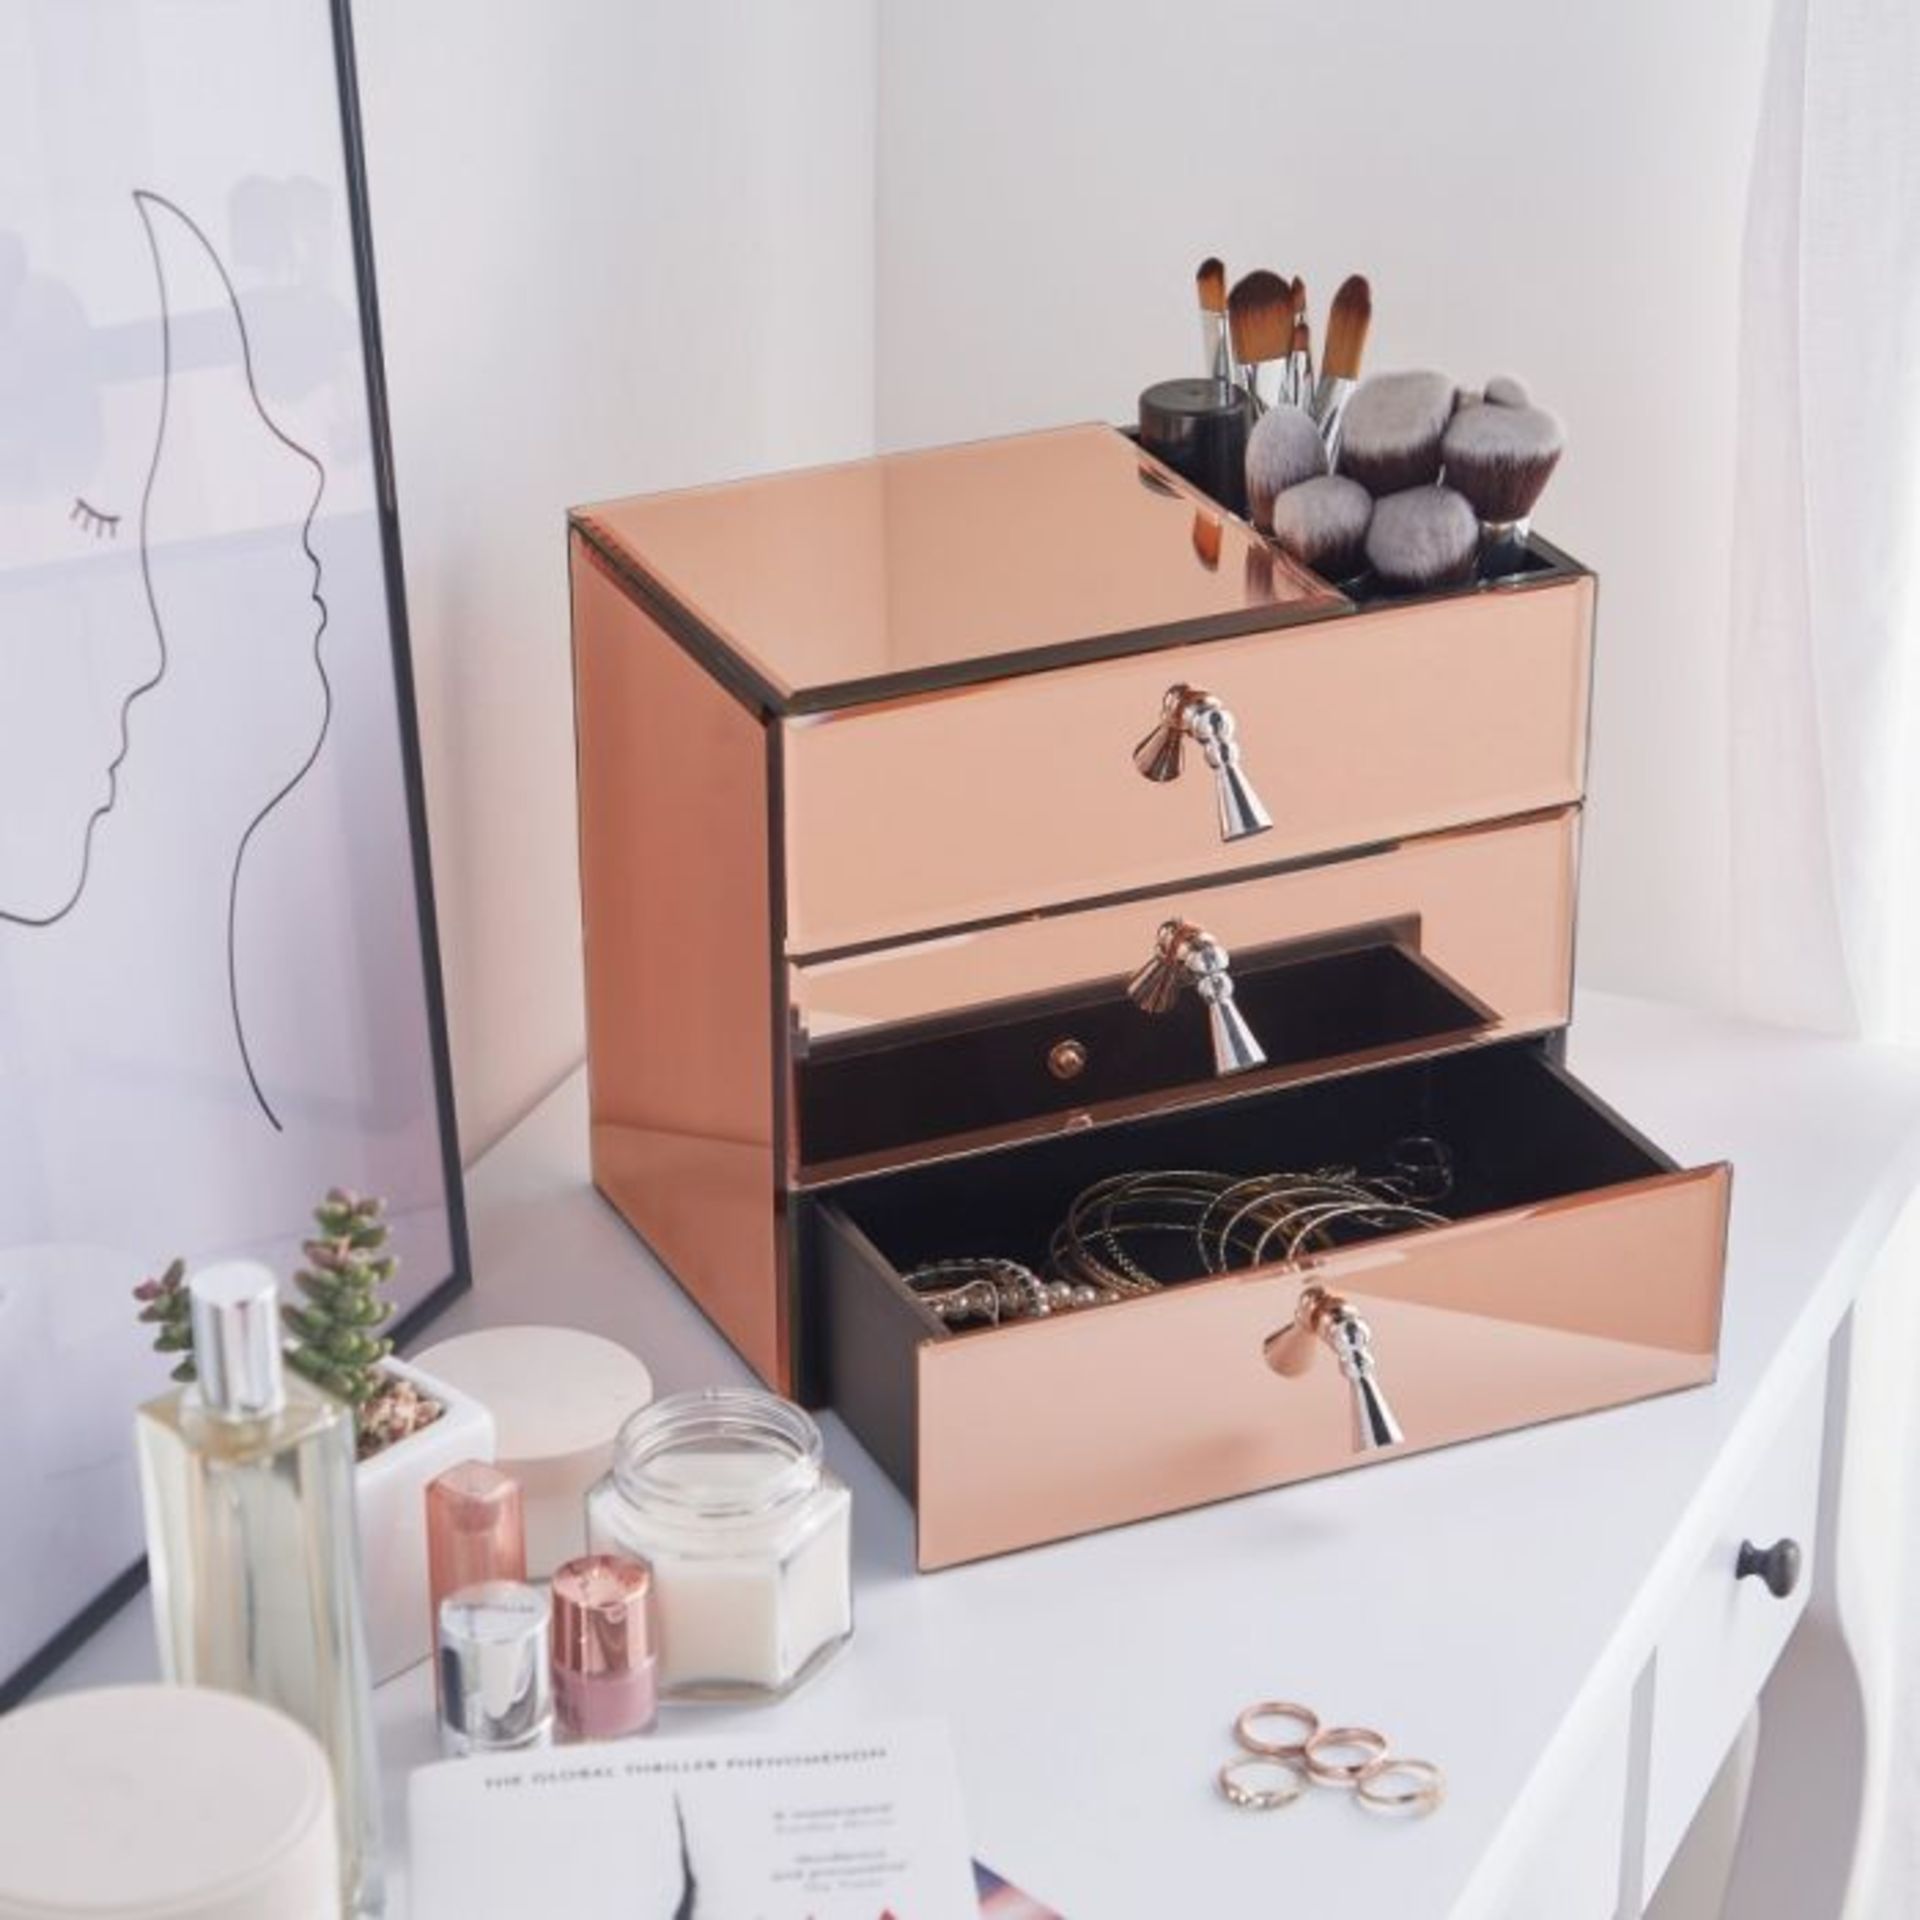 (V165) Rose Gold 3 Drawer Mirrored Jewellery Organiser. The perfect place to hide away clutter... - Image 4 of 4